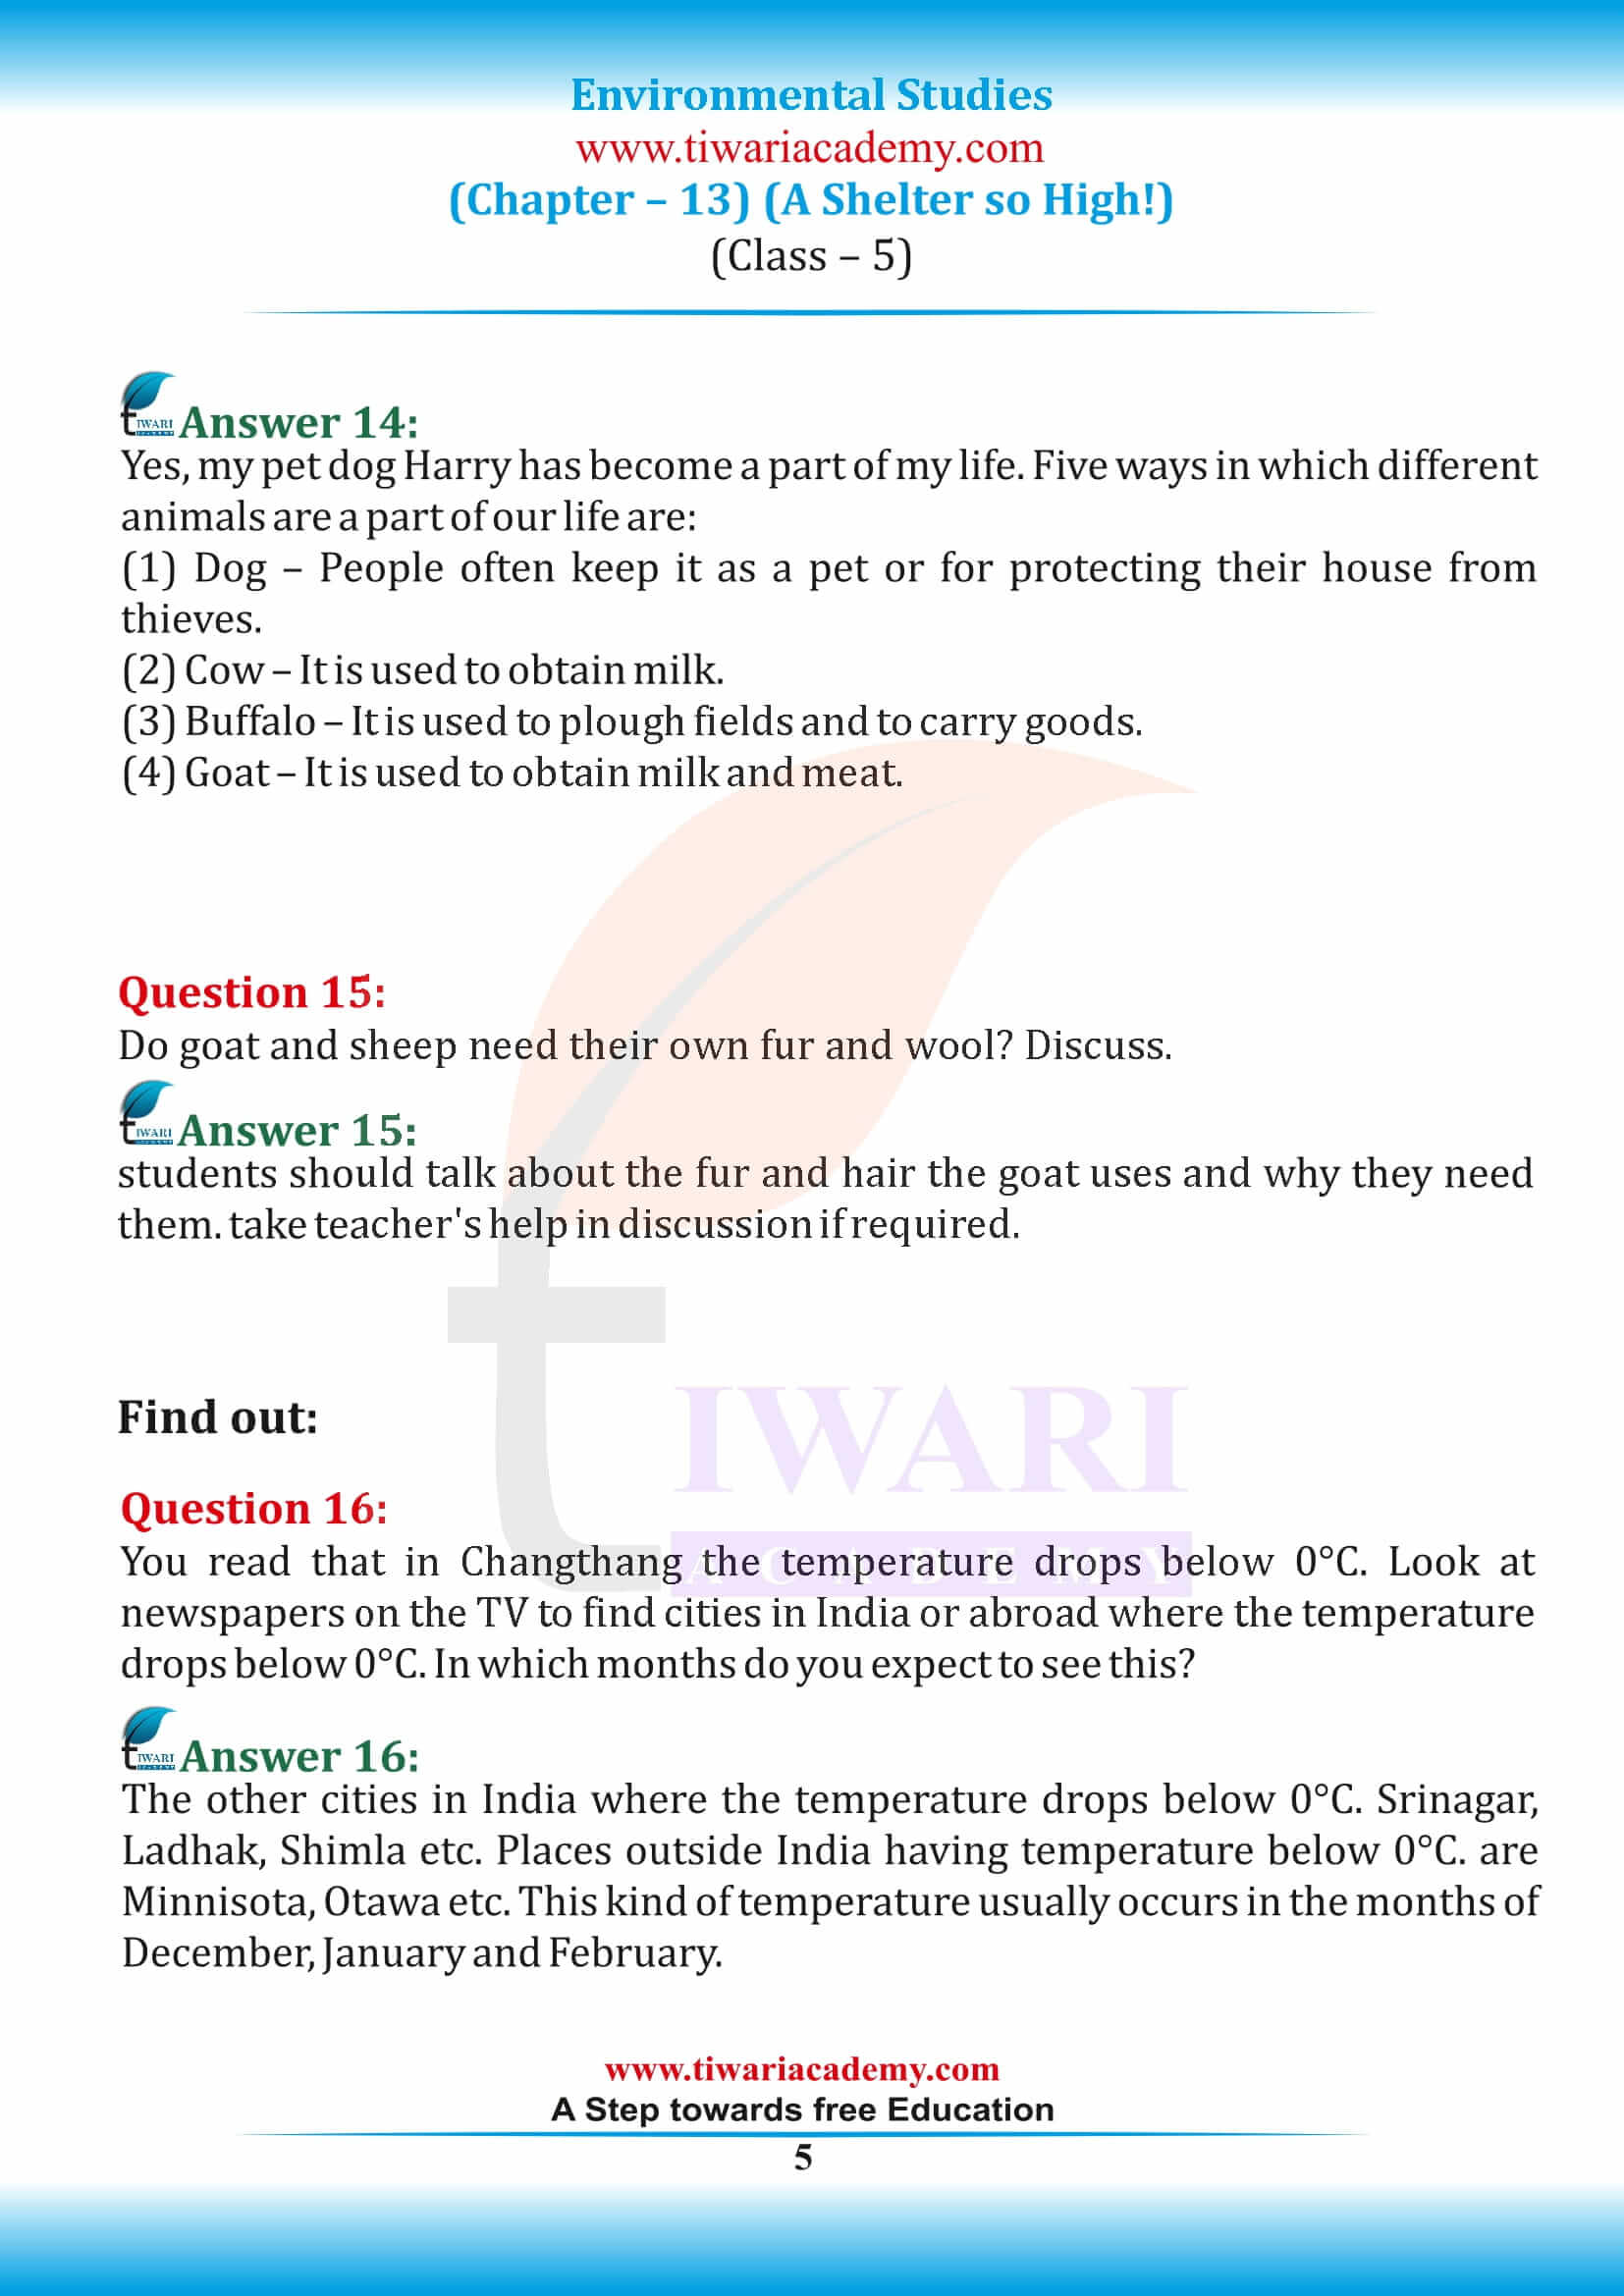 NCERT Solutions for Class 5 EVS Chapter 13 free download